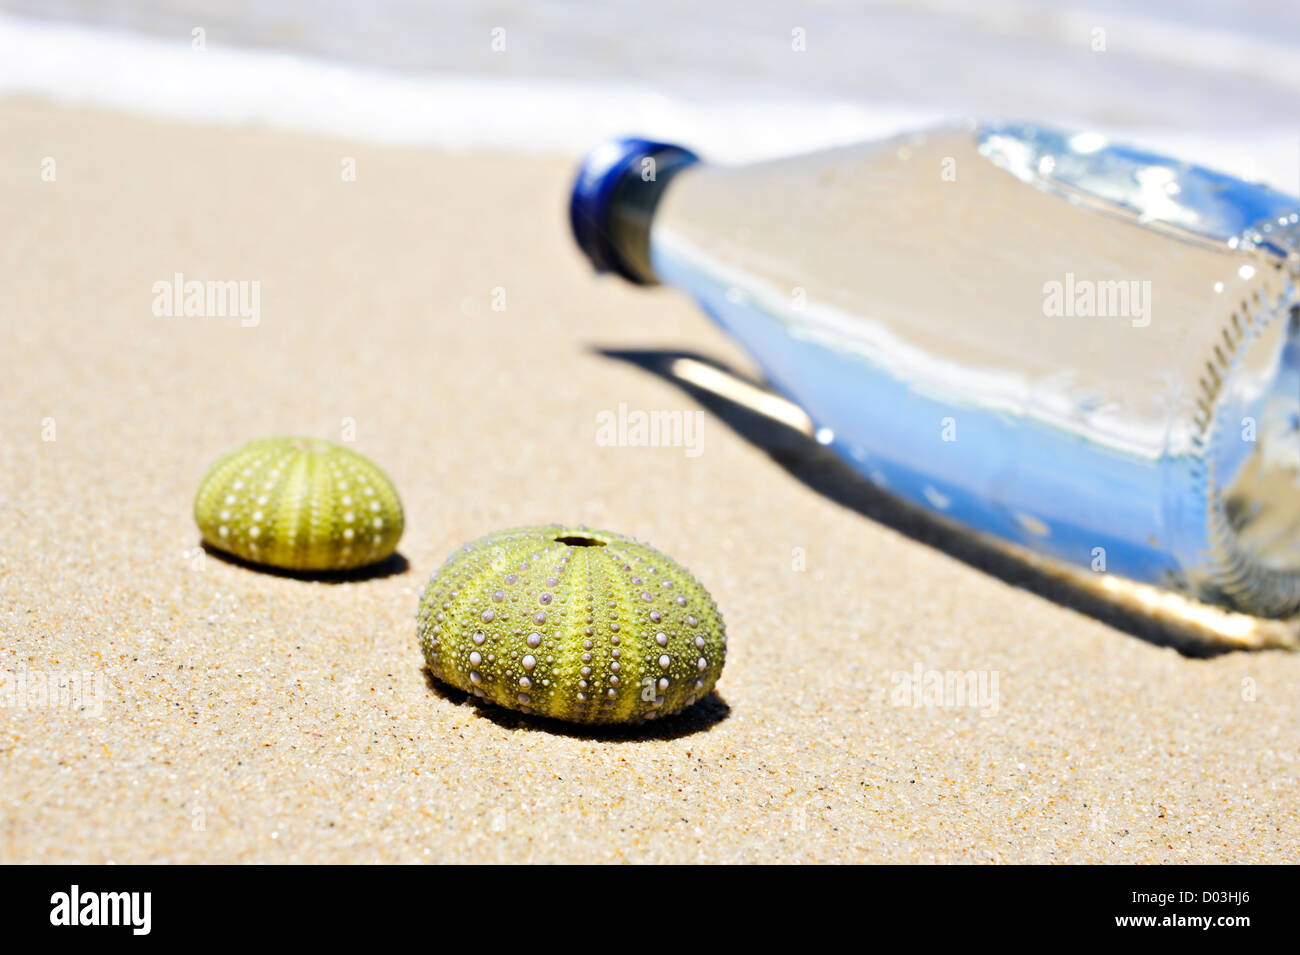 Beach scene with two dead sea urchin shells and a bottle of water Stock Photo